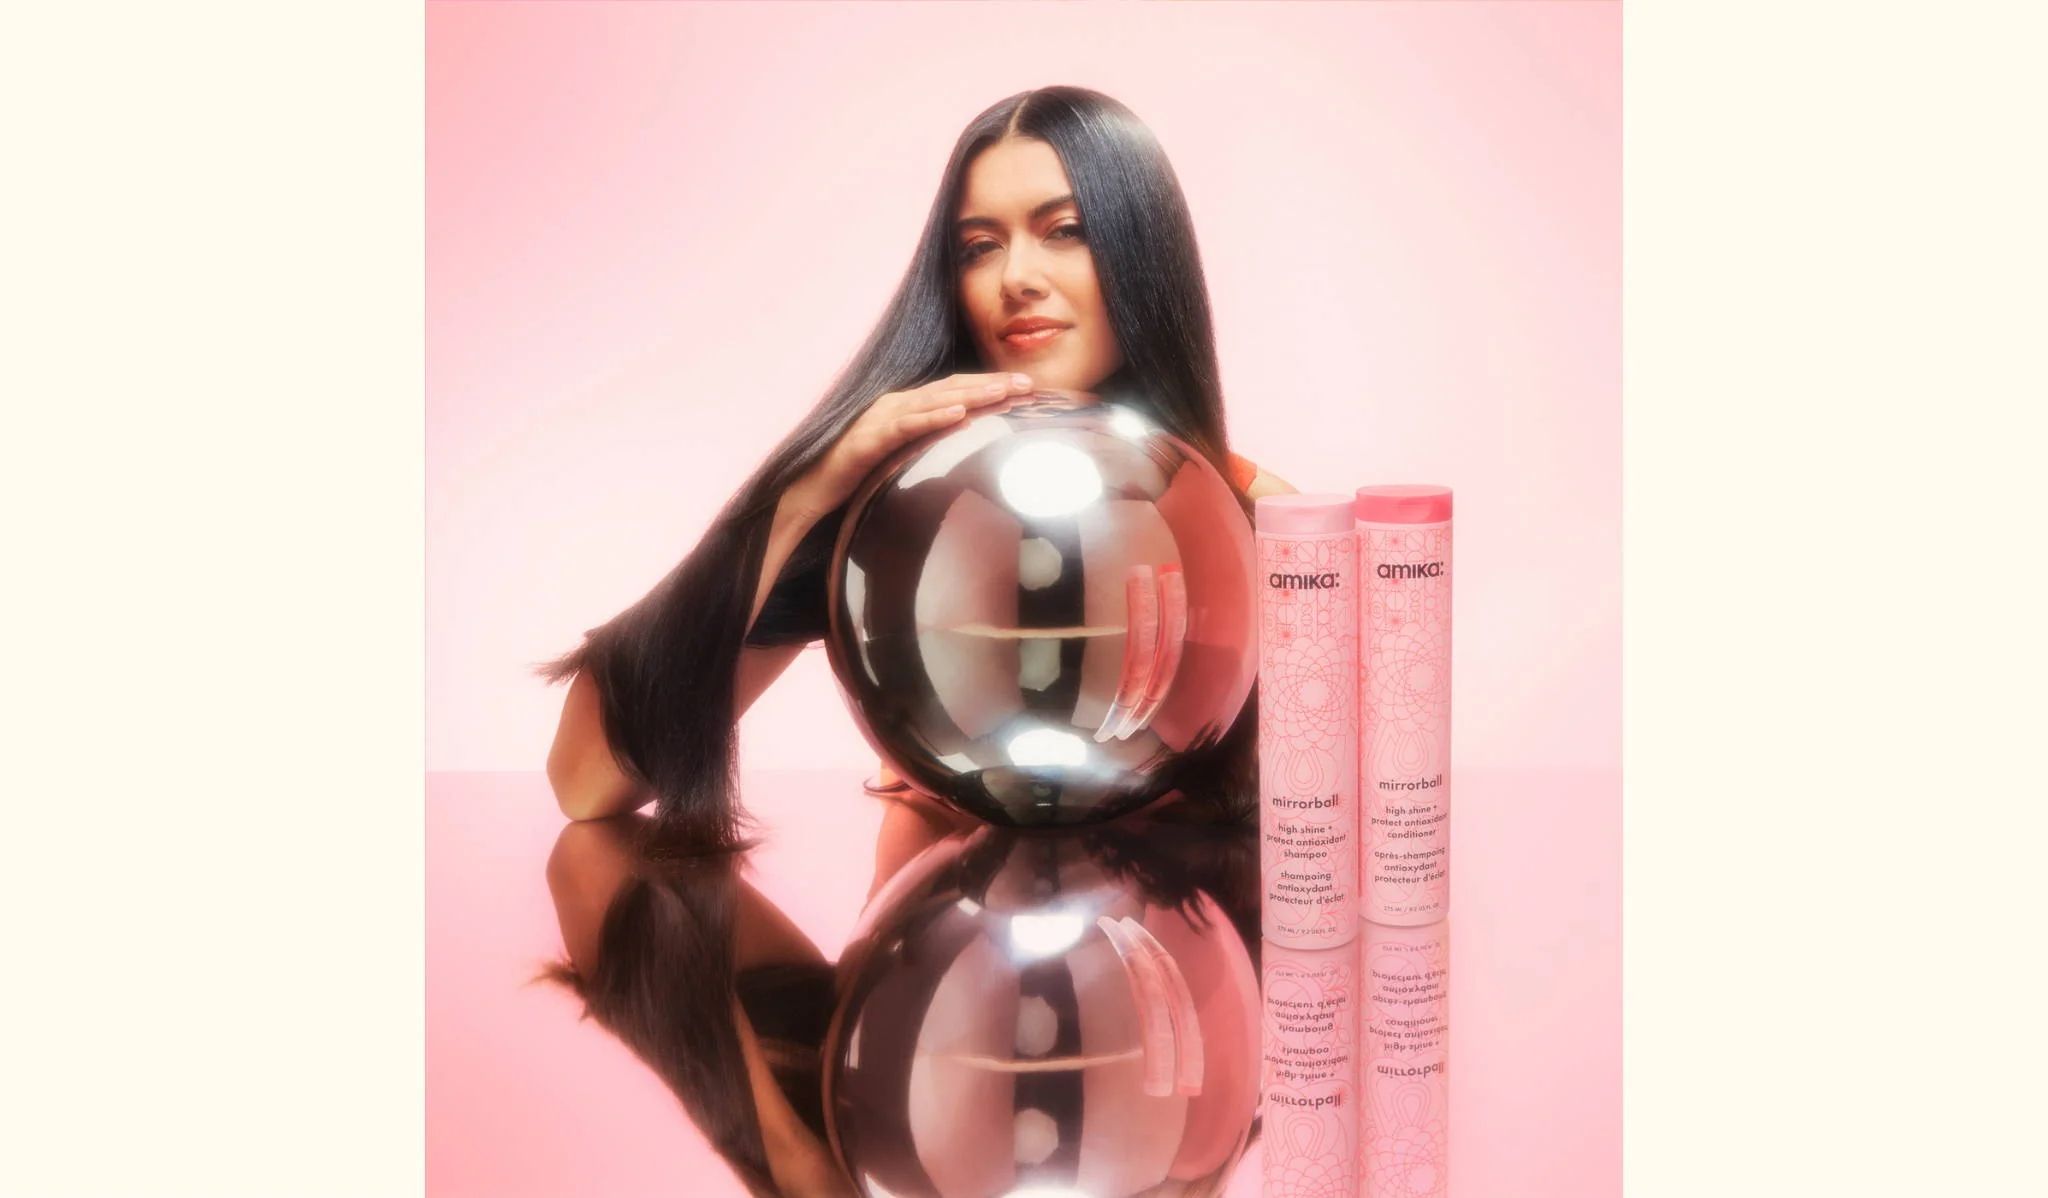 model with mirrorball high shine + protect antioxidant shampoo and conditioner